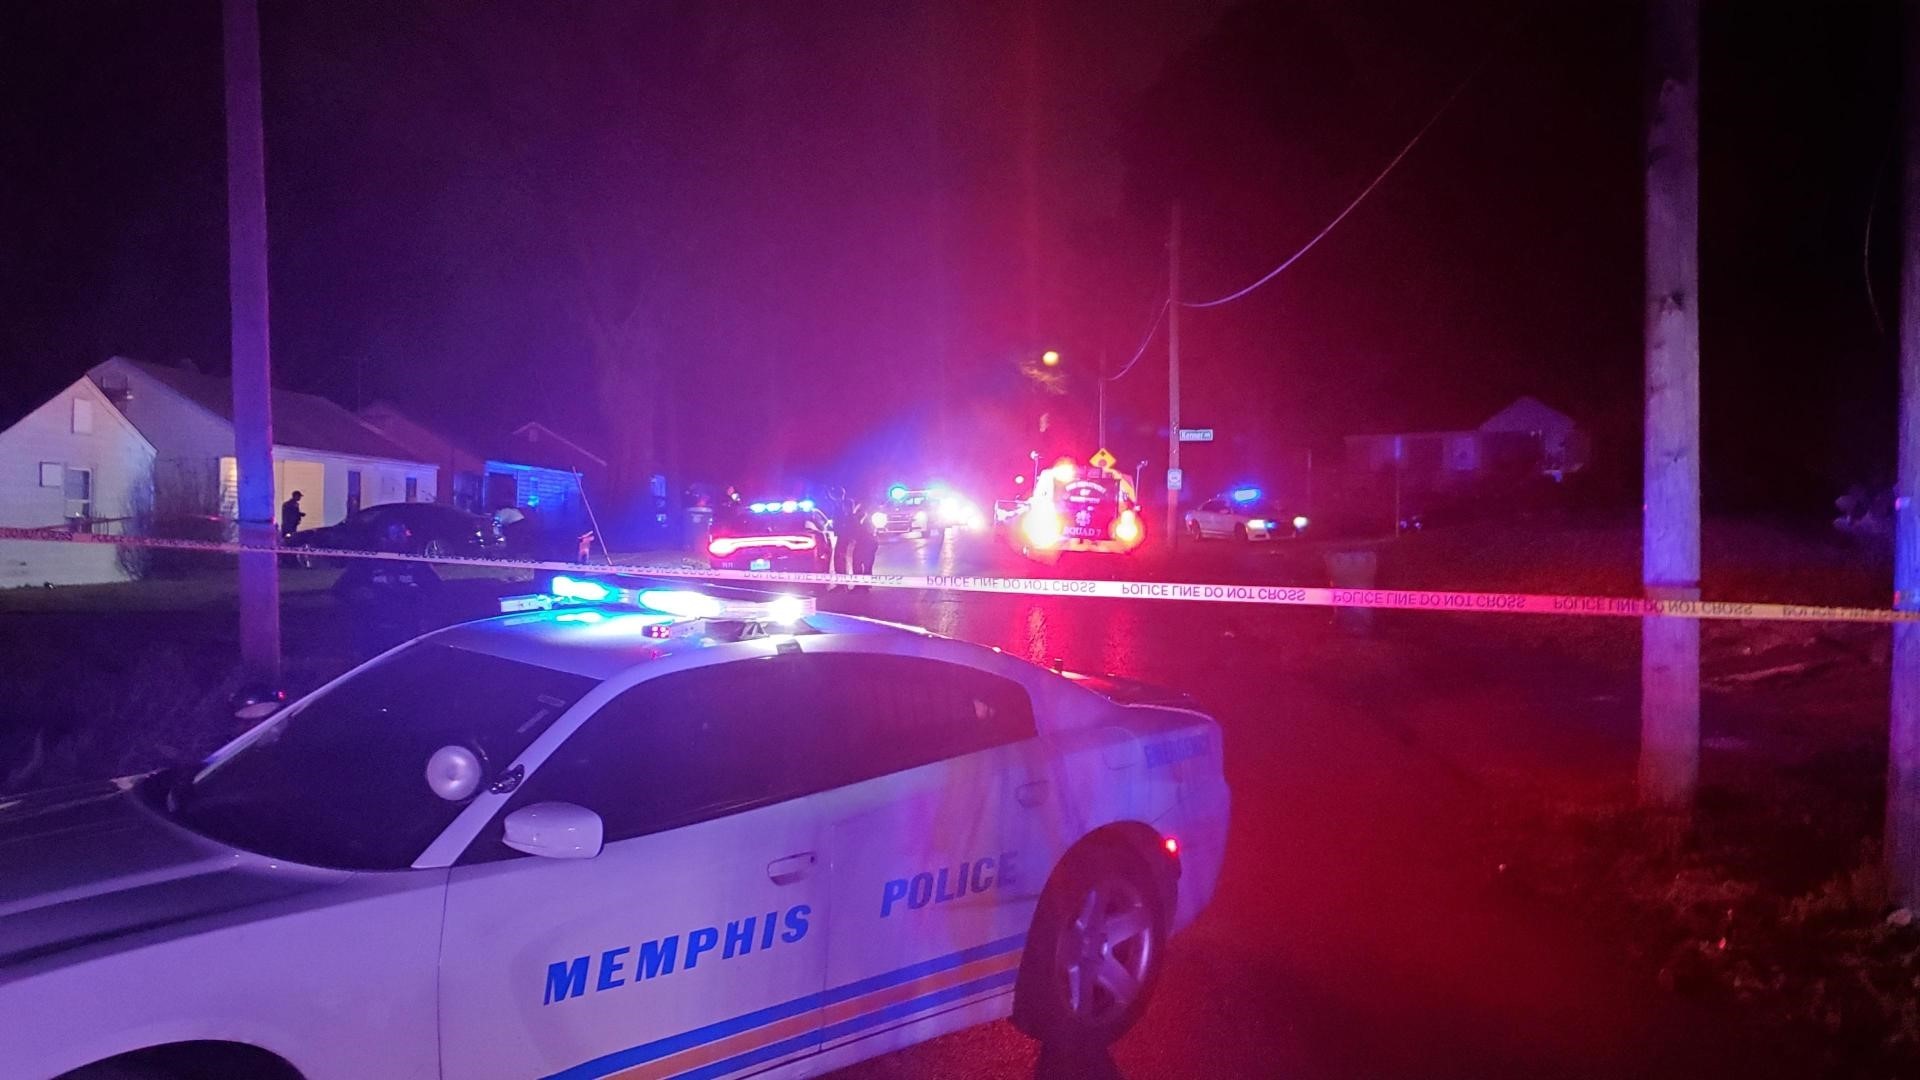 According to MPD, at 10:23 p.m., officers responded to the corner of Labelle Street and Kenner Avenue regarding a shooting.